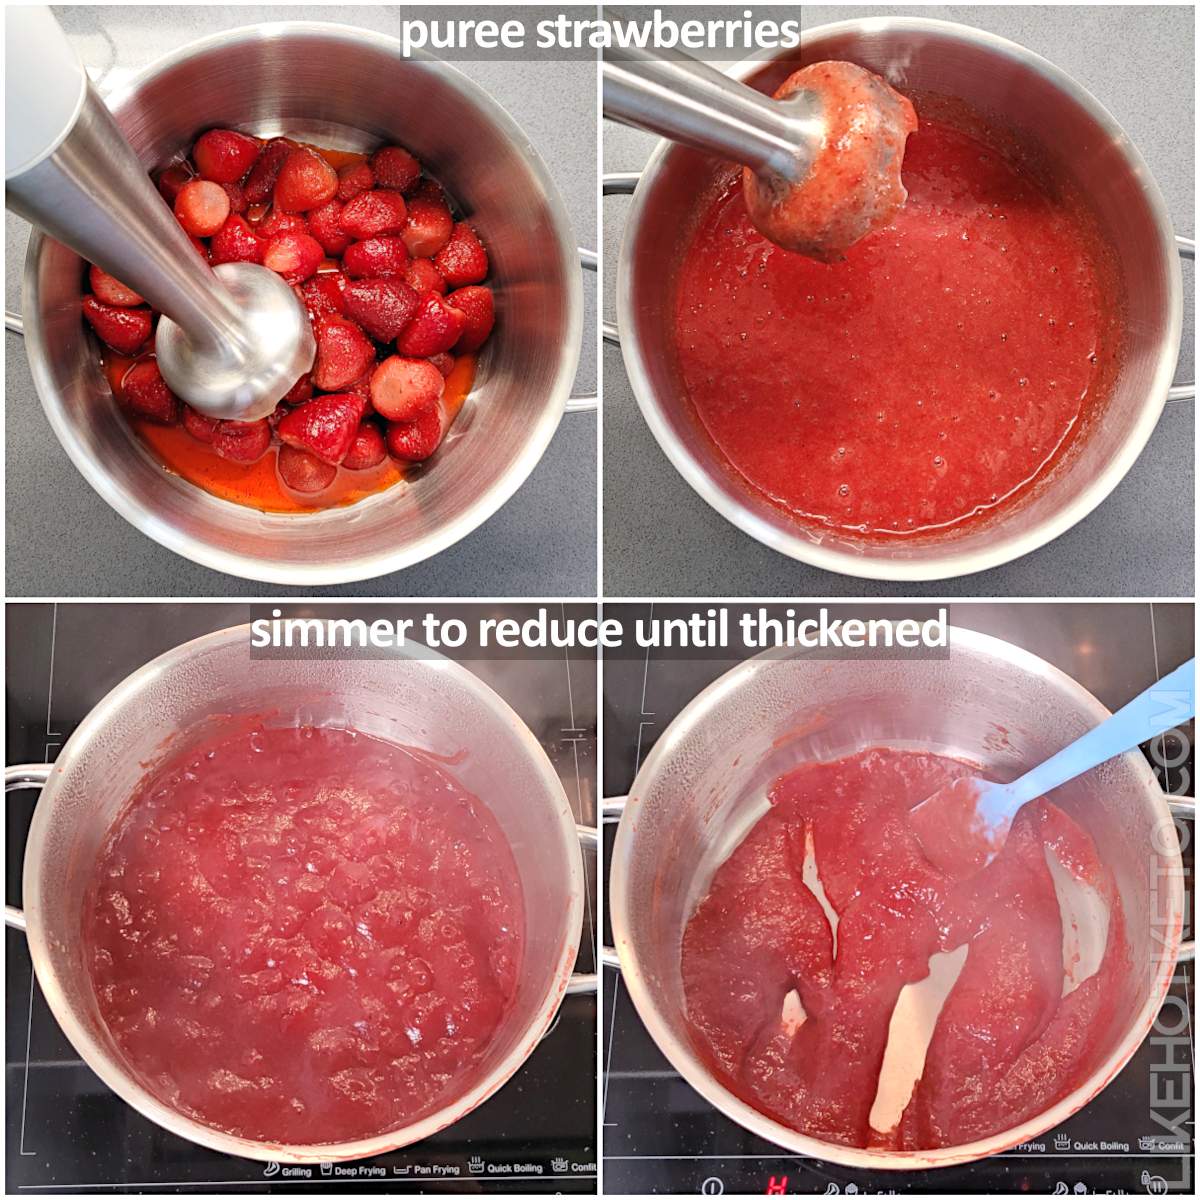 Making the reduction of strawberries for flavoring the keto cupcakes, pureeing and simmering strawberry sauce until thick.